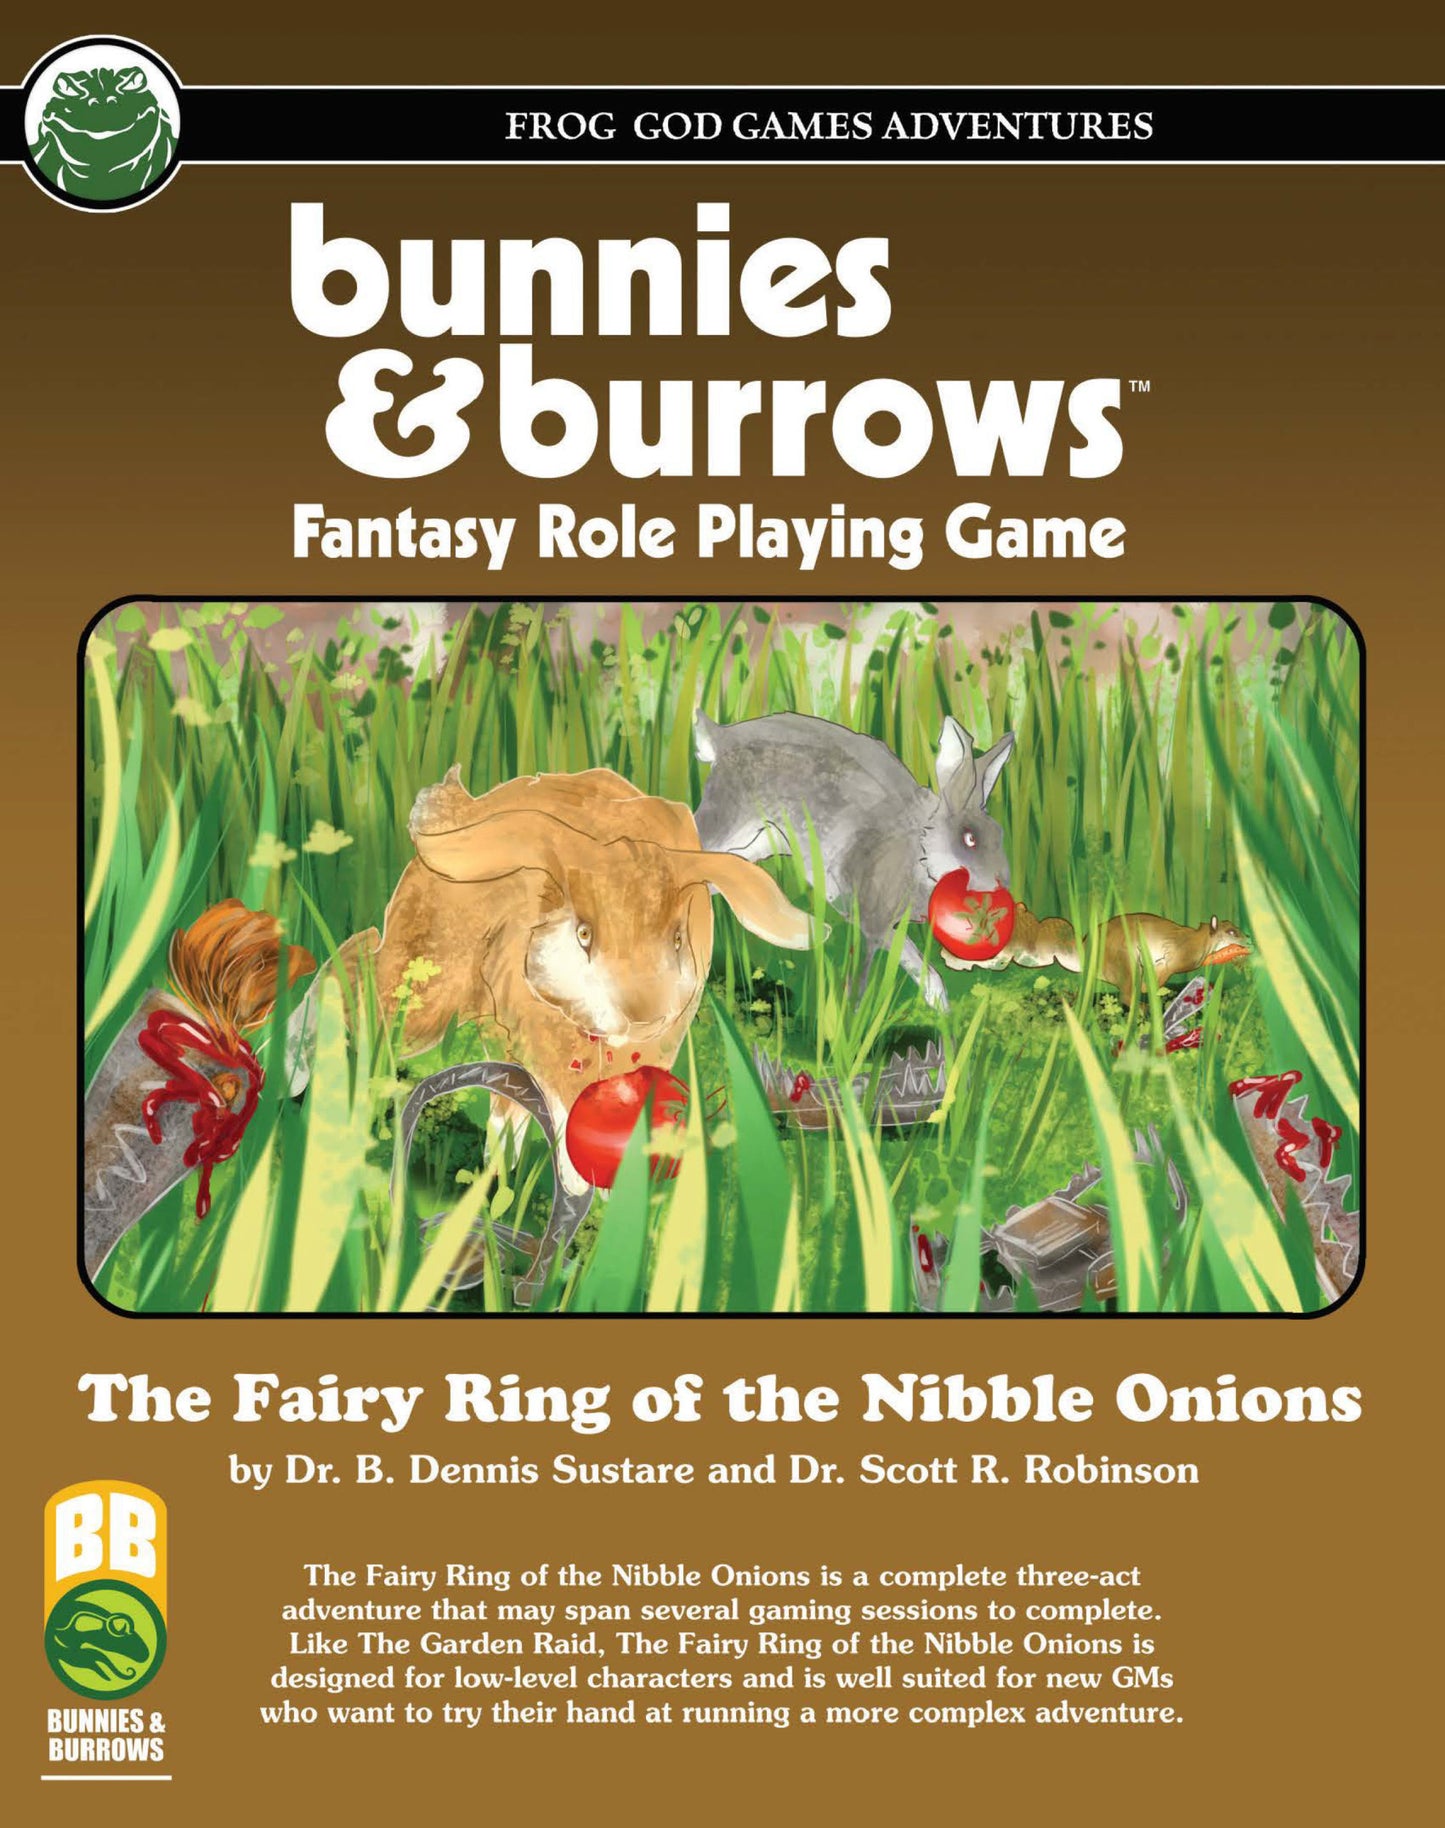 The Fairy Ring of the Nibble Onions